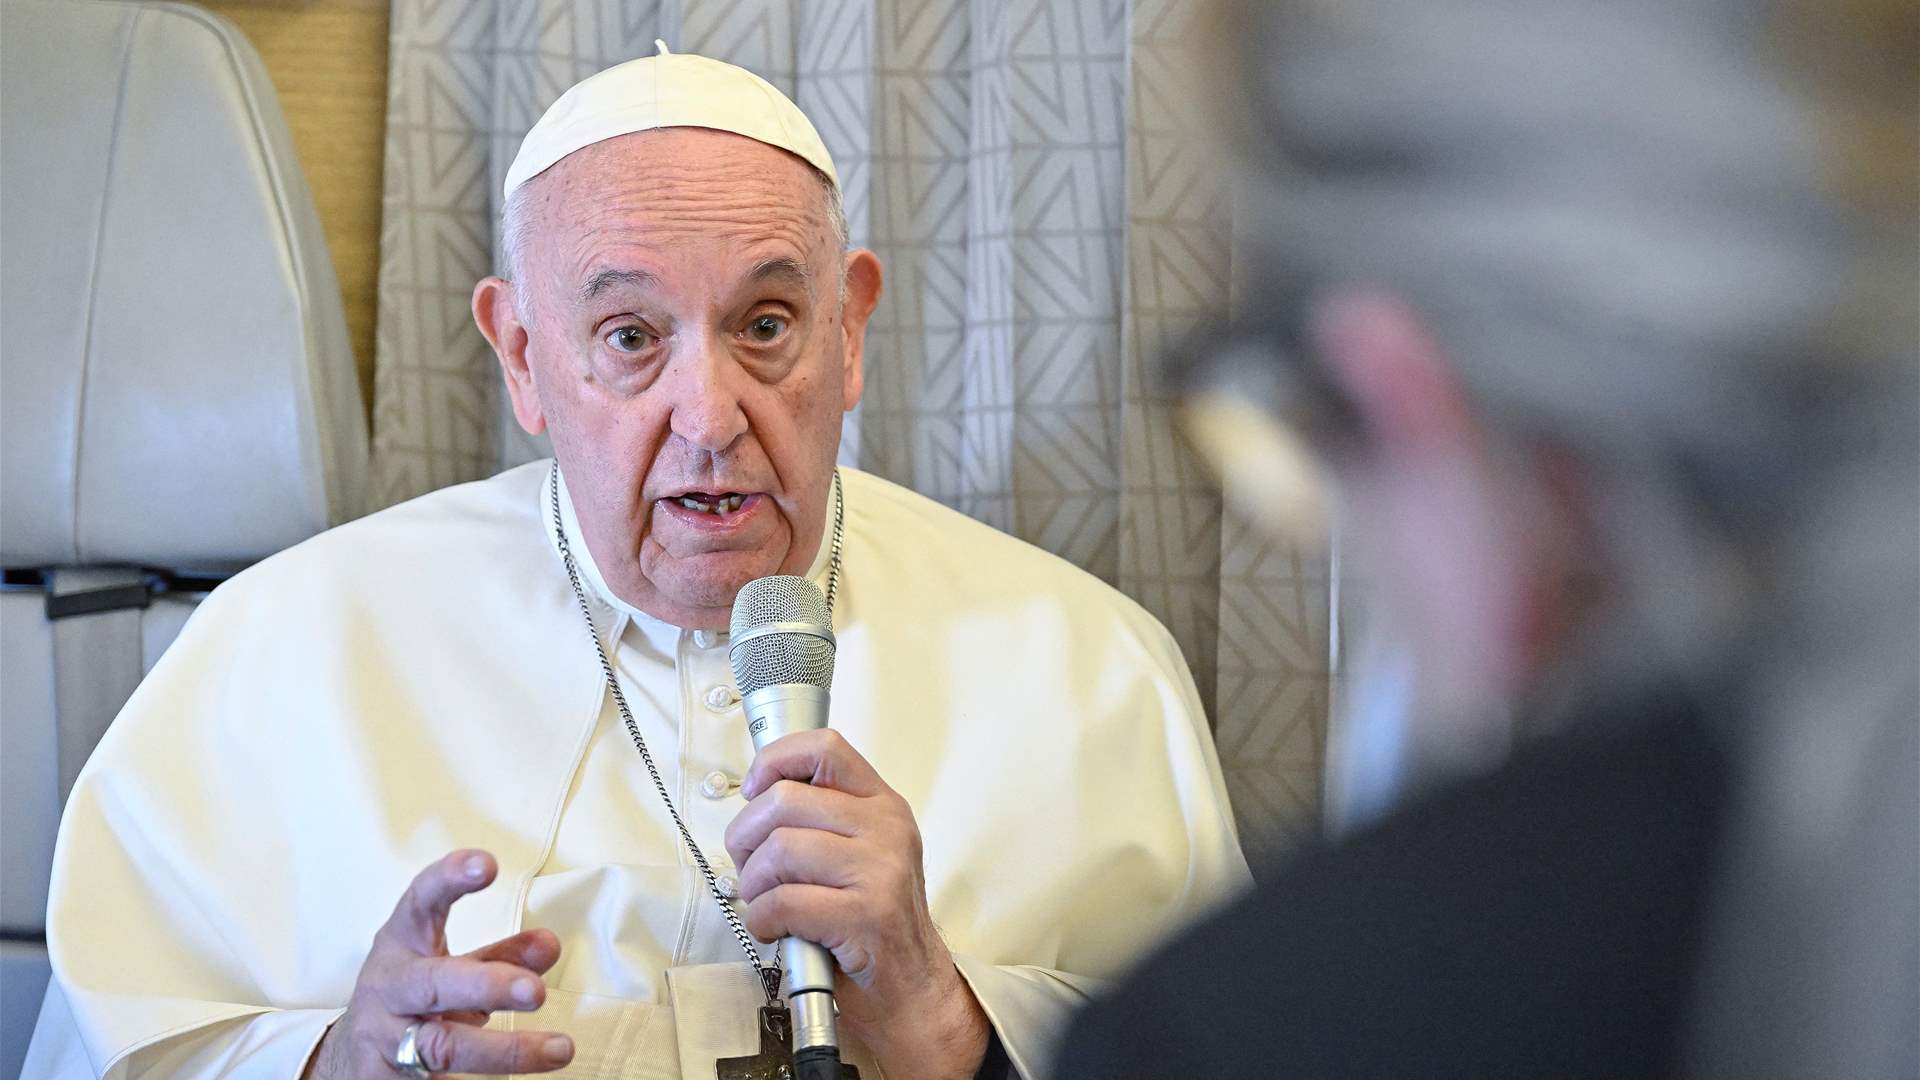 Pope Francis encourages diplomatic solution to Ukraine war on anniversary of invasion